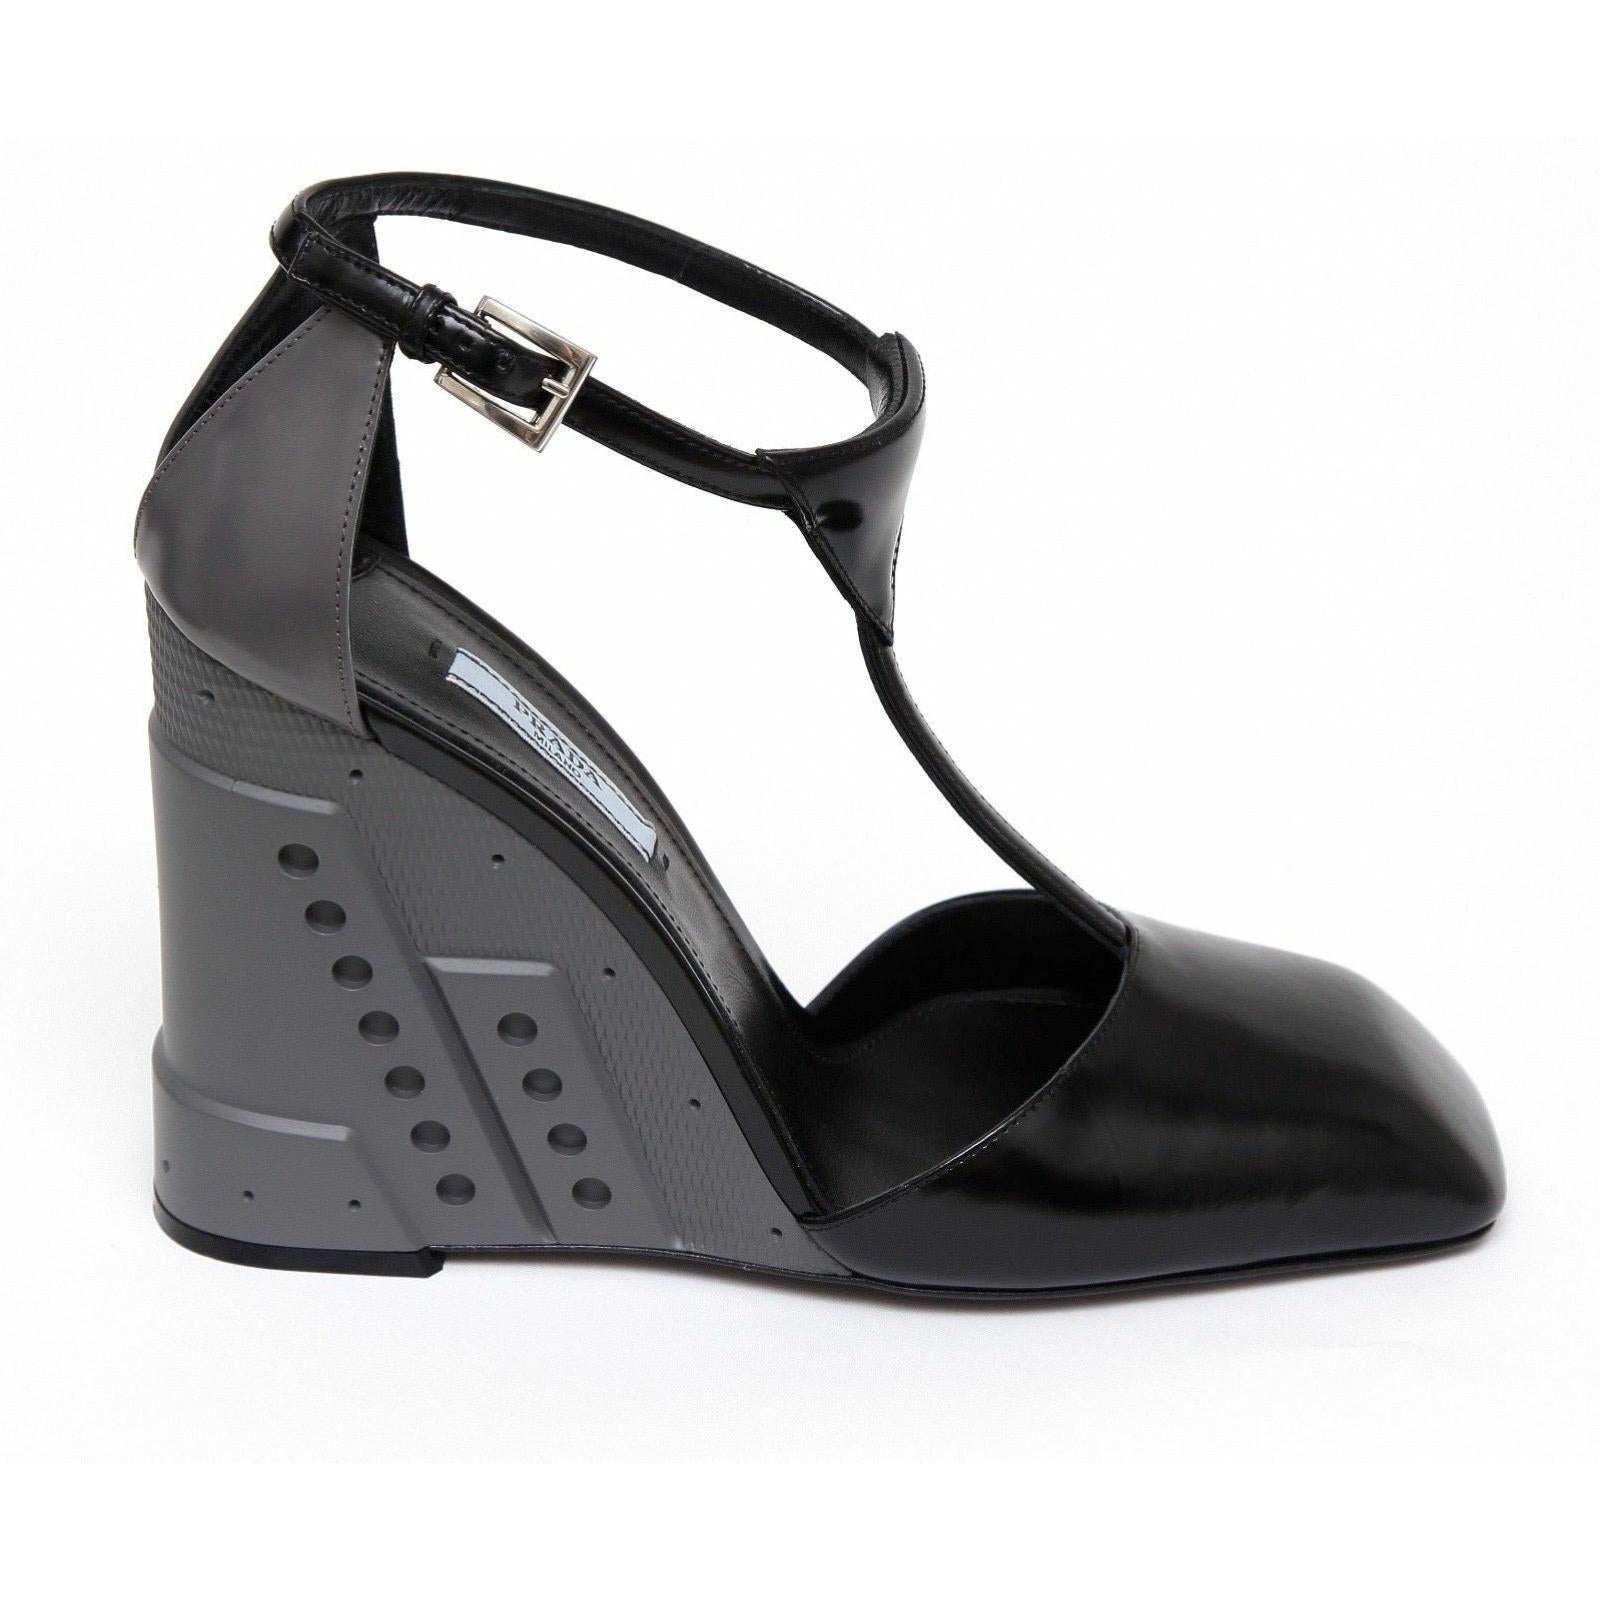 GUARANTEED AUTHENTIC PRADA SQUARE TOE BLACK LEATHER WEDGE PUMP


Details:
- Black leather square toe wedge pump.
- T-strap, adjustable silver-tone buckle closure.
- Grey leather at back of shoe and grey resin architectural wedge.
- Leather insole